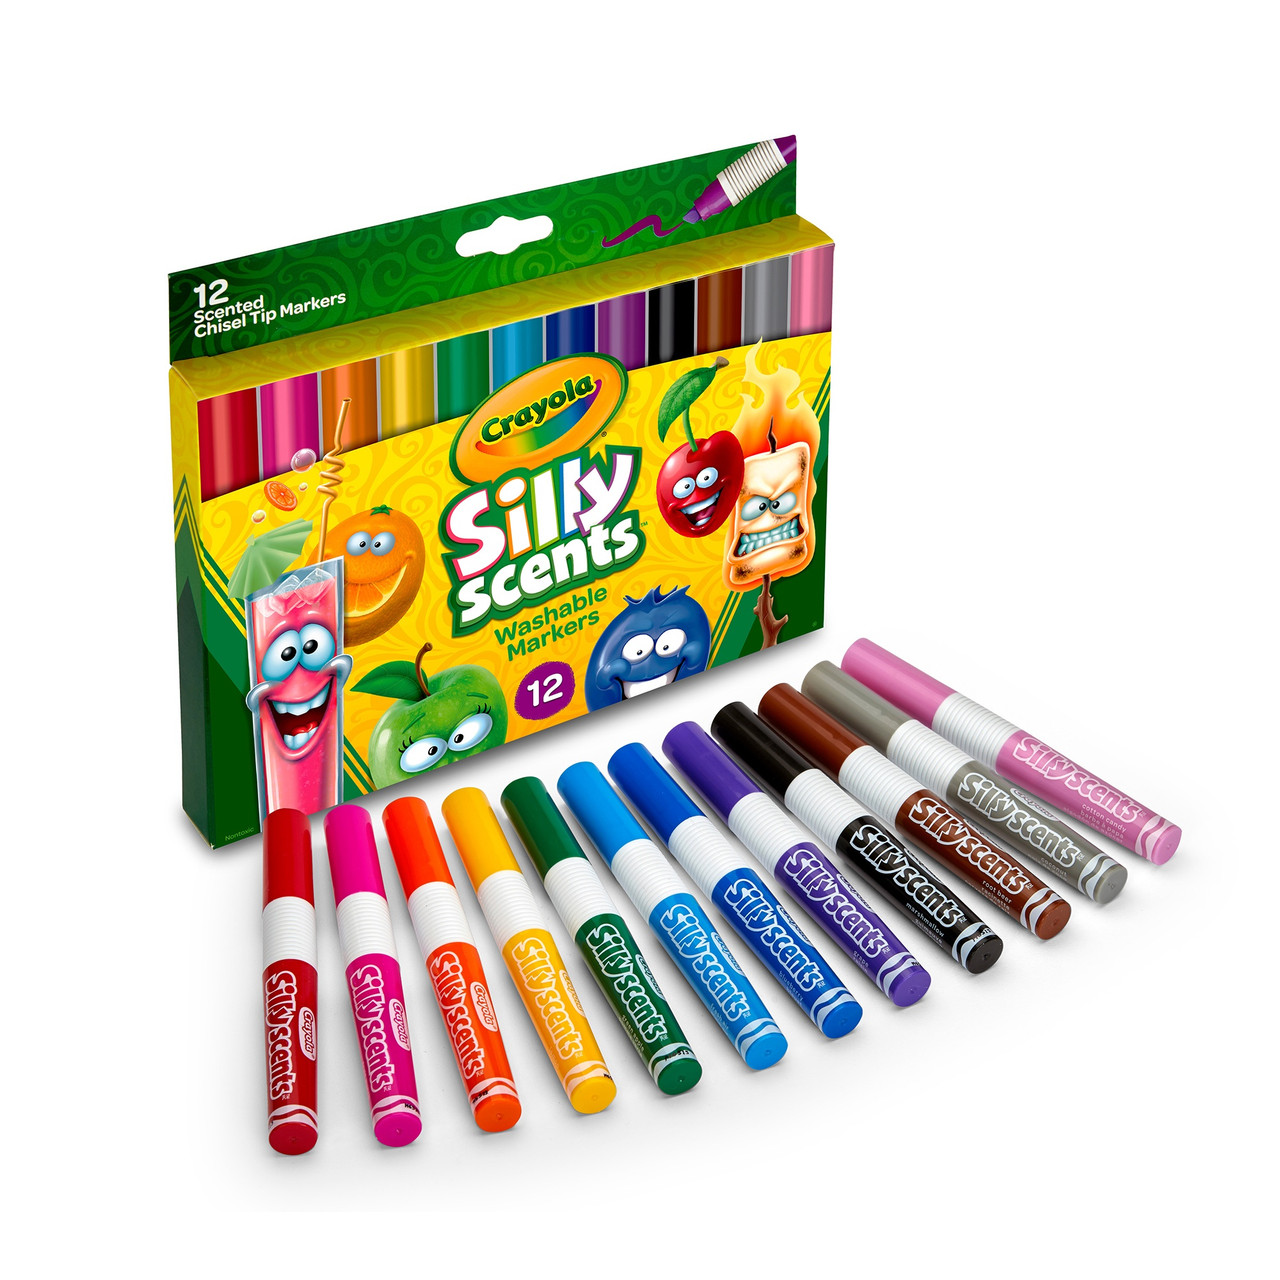 Crayola 12 Ct Fine Washable Markers, Pack of 24â€¦ - Name Brand Overstock